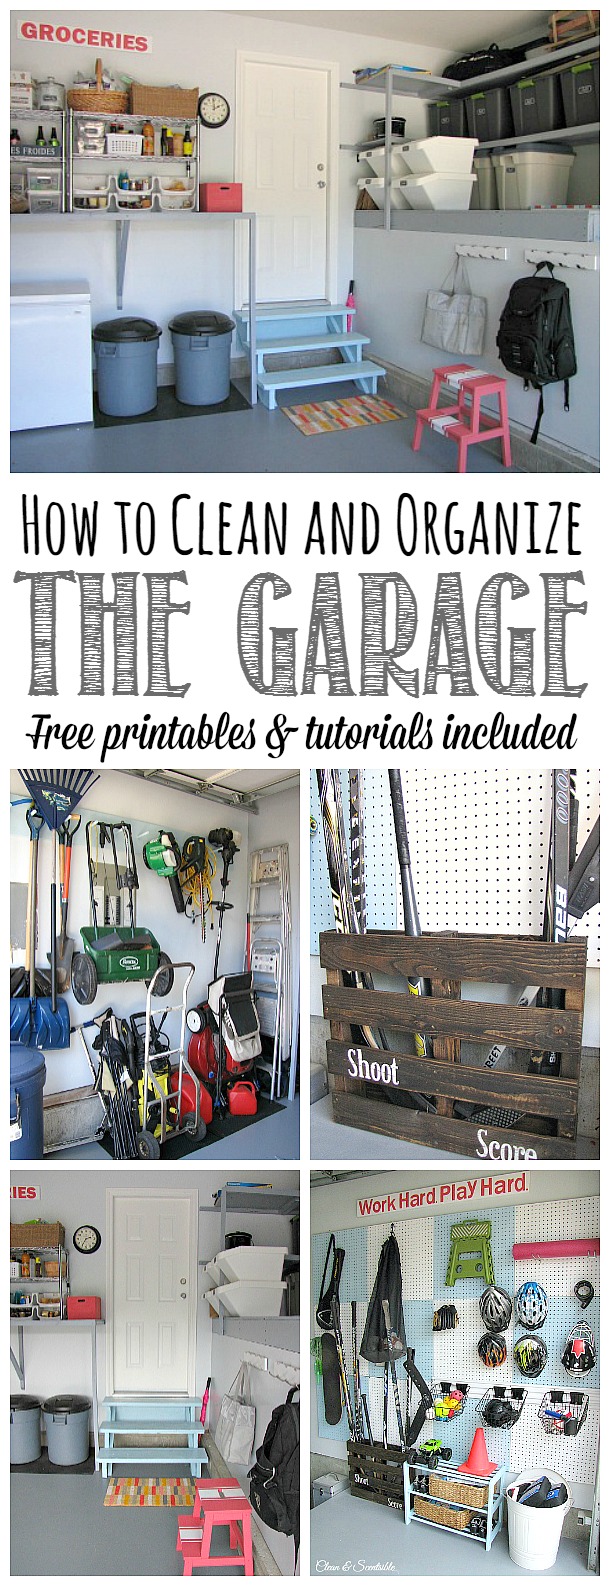 garage clean organize organization organized household diet storage organizing printables everything need keep cleaning diy cleaned help cleanandscentsible garages shed